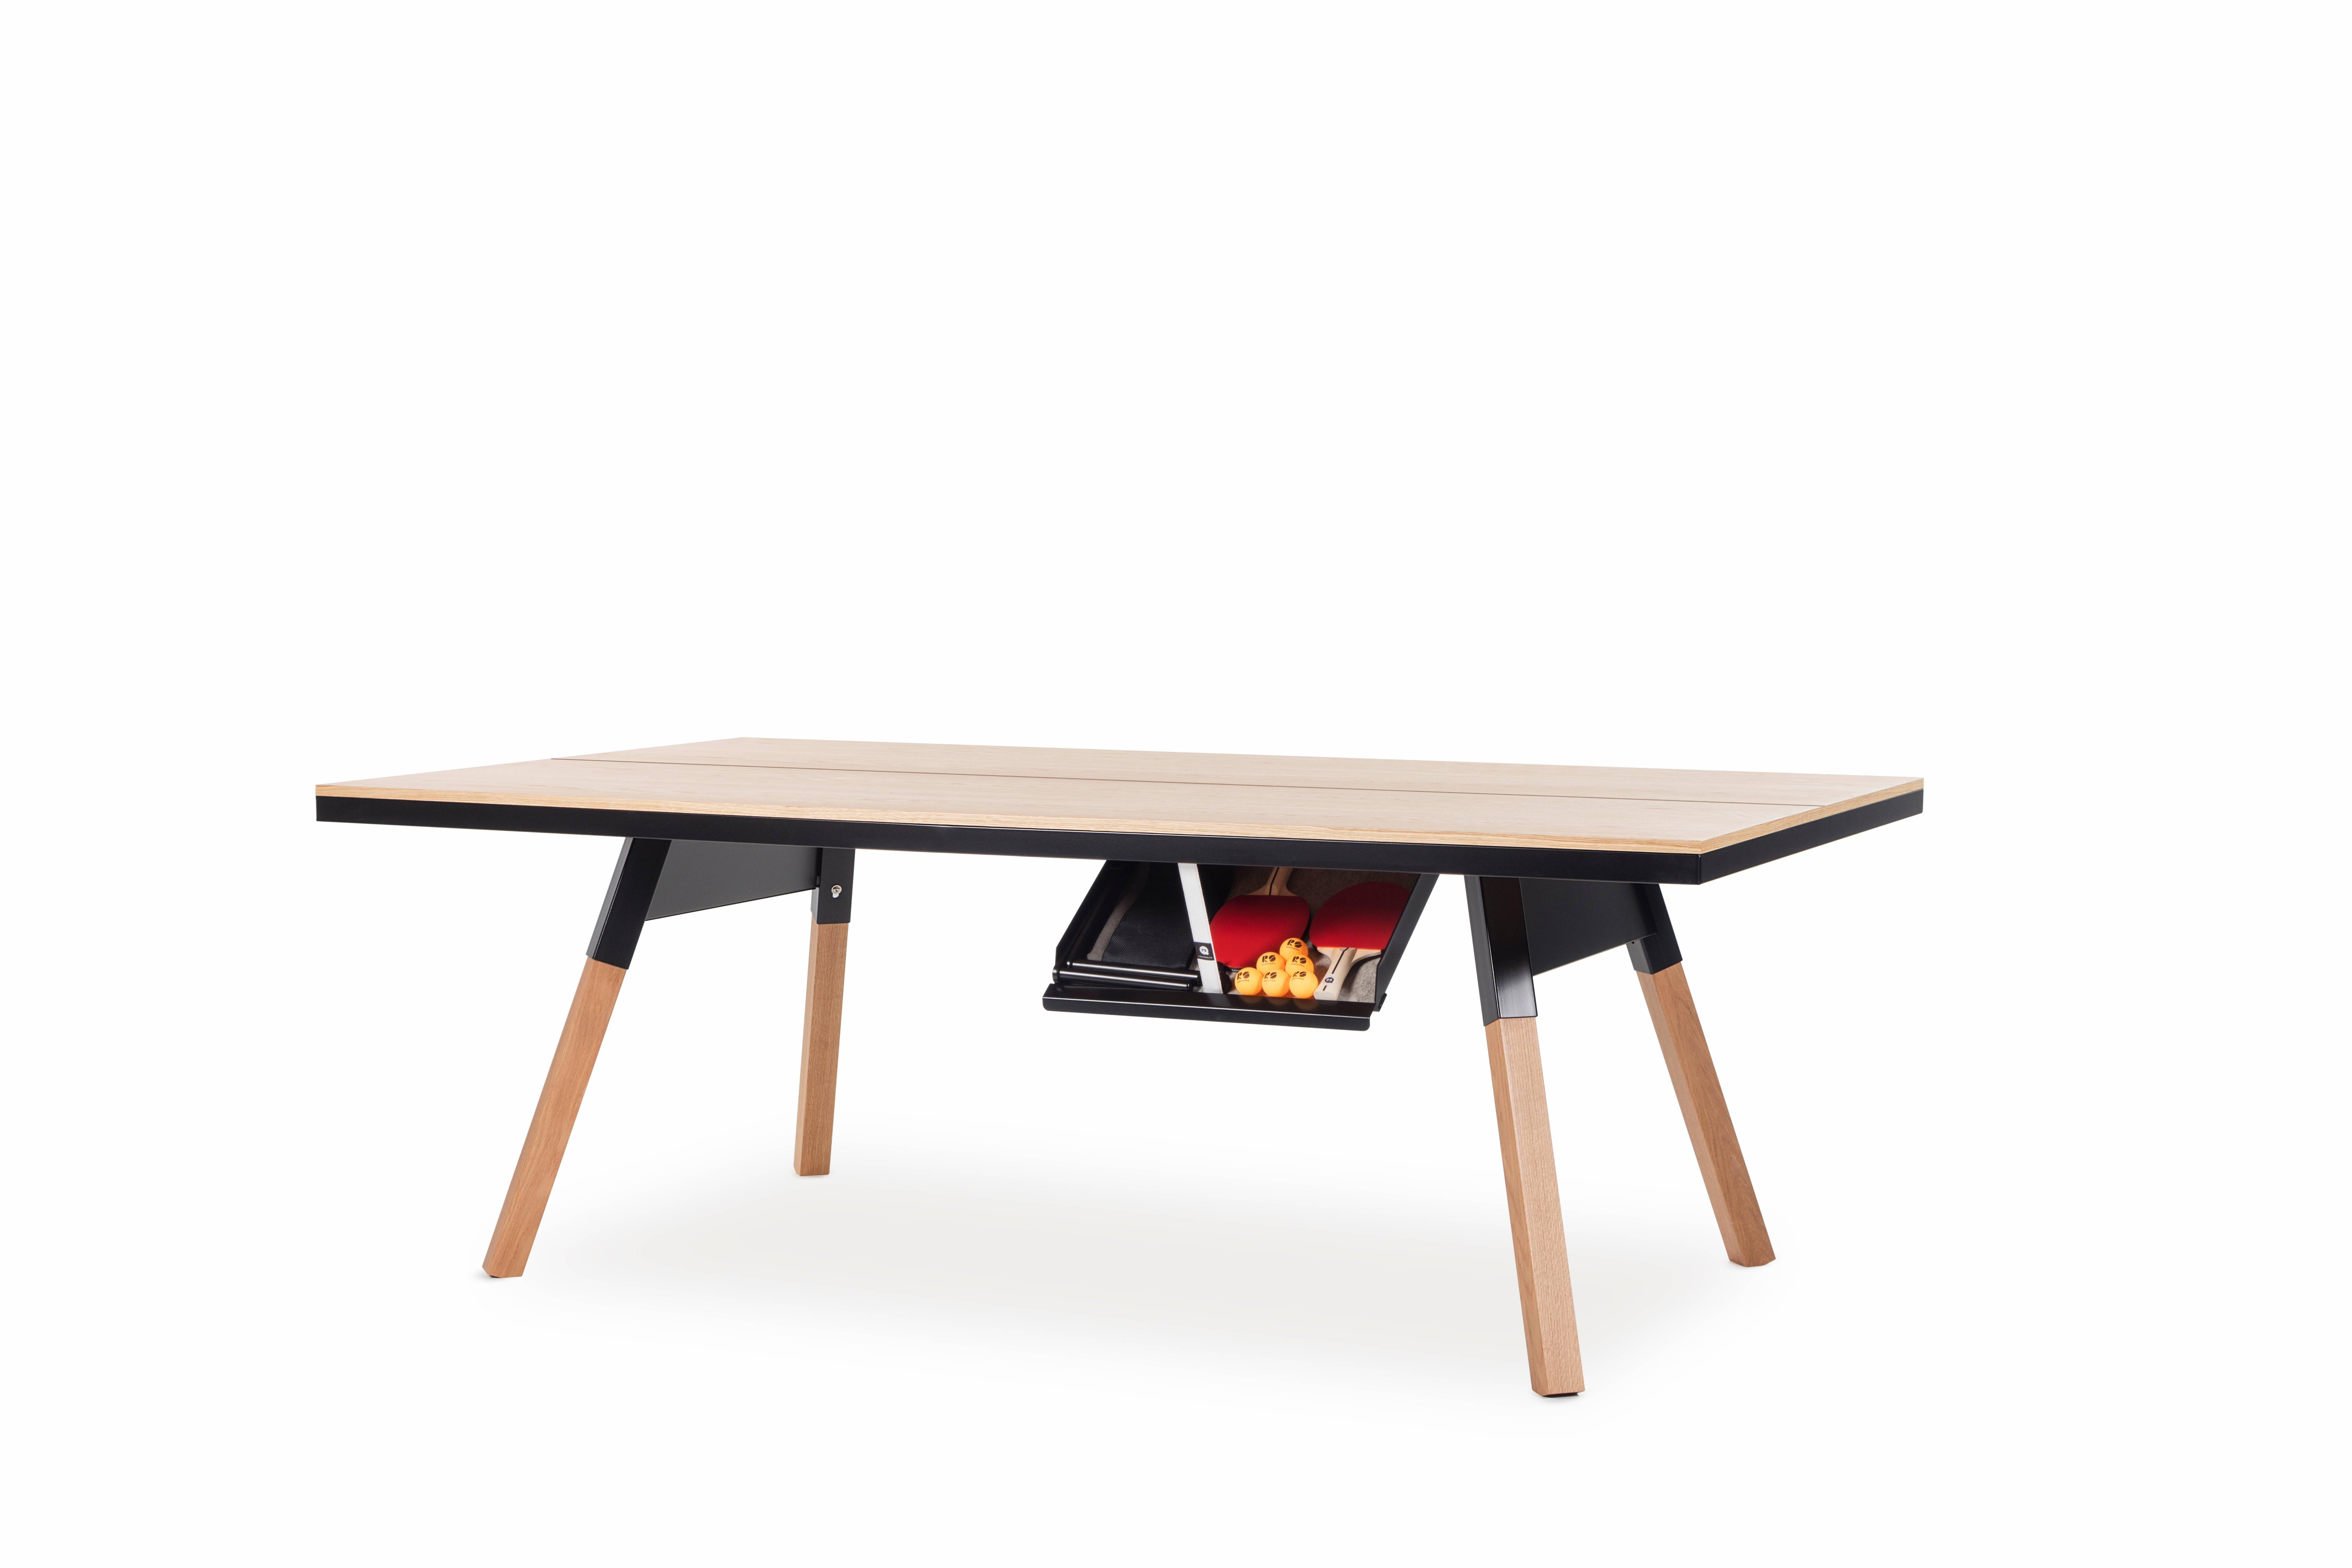 With our wood topped Medium You and Me ping-pong table, we’ve taken our playful attitude indoors. Wood offers comfort and elegance, while sportiness blends in seamlessly in new settings. There’s a place for everything with a You and Me. There’s a